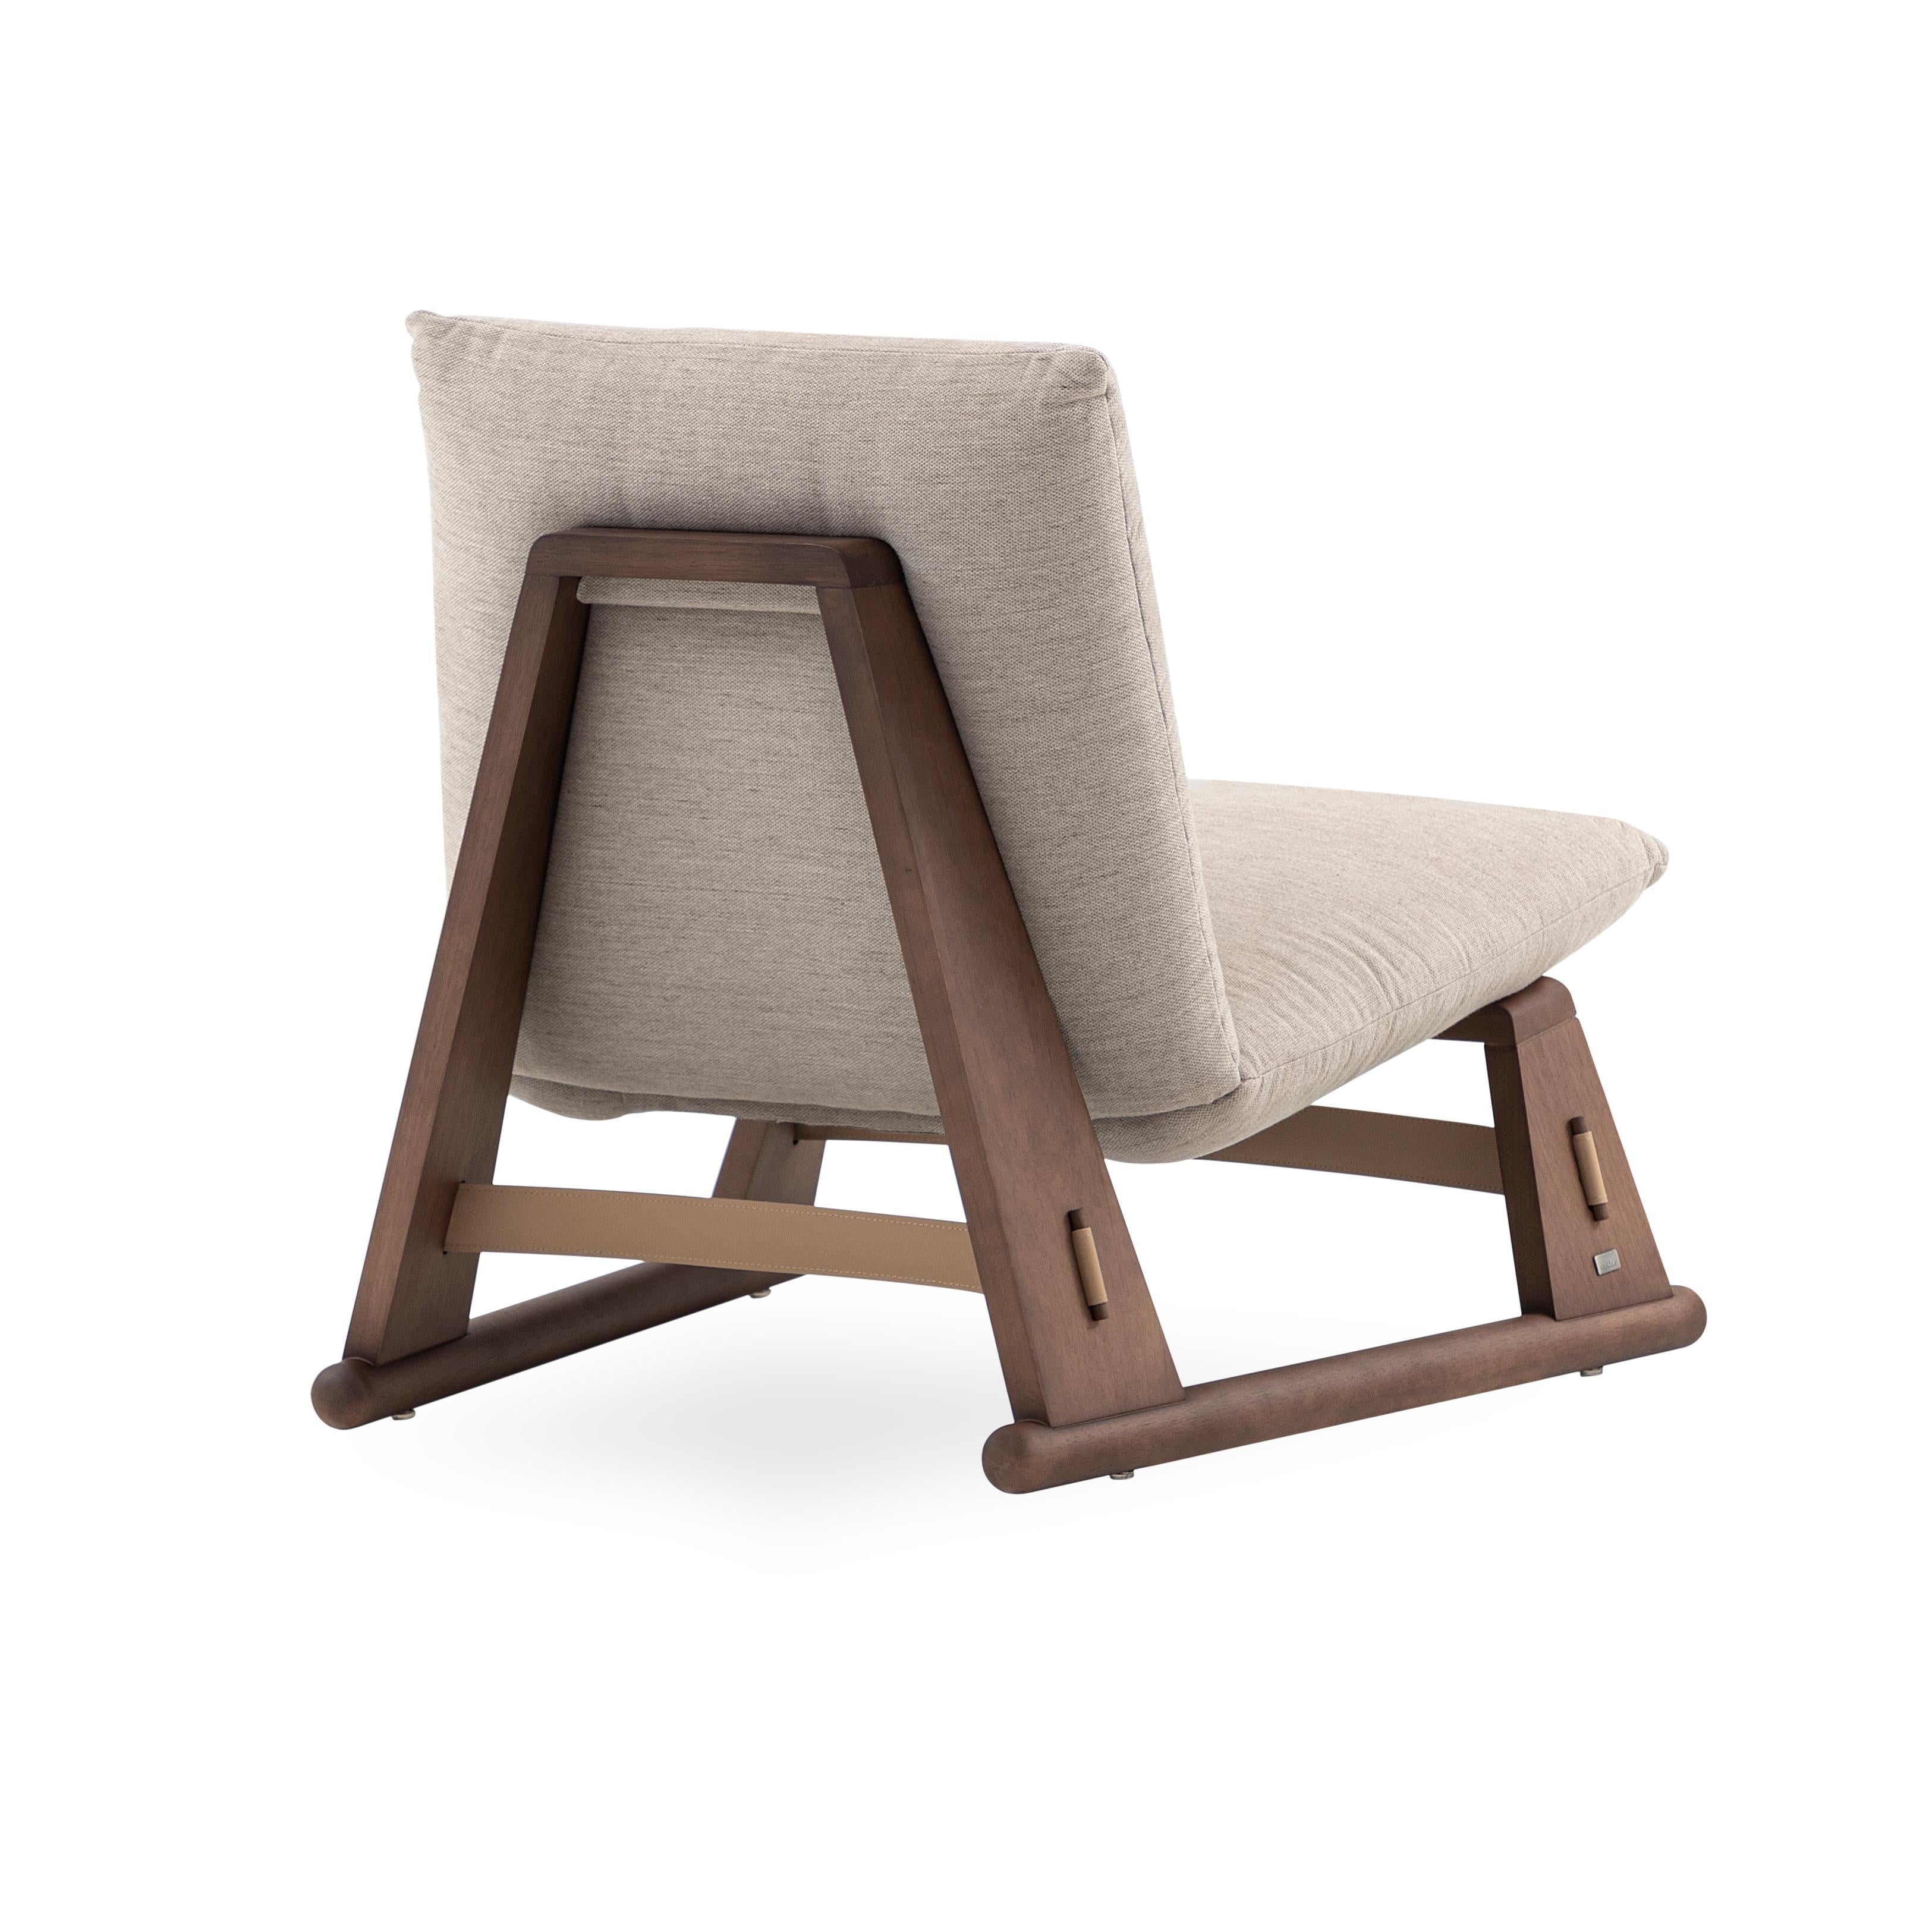 Brazilian Contemporary Maia Chair in Walnut Wood Finish Frame and Light Beige Fabric For Sale